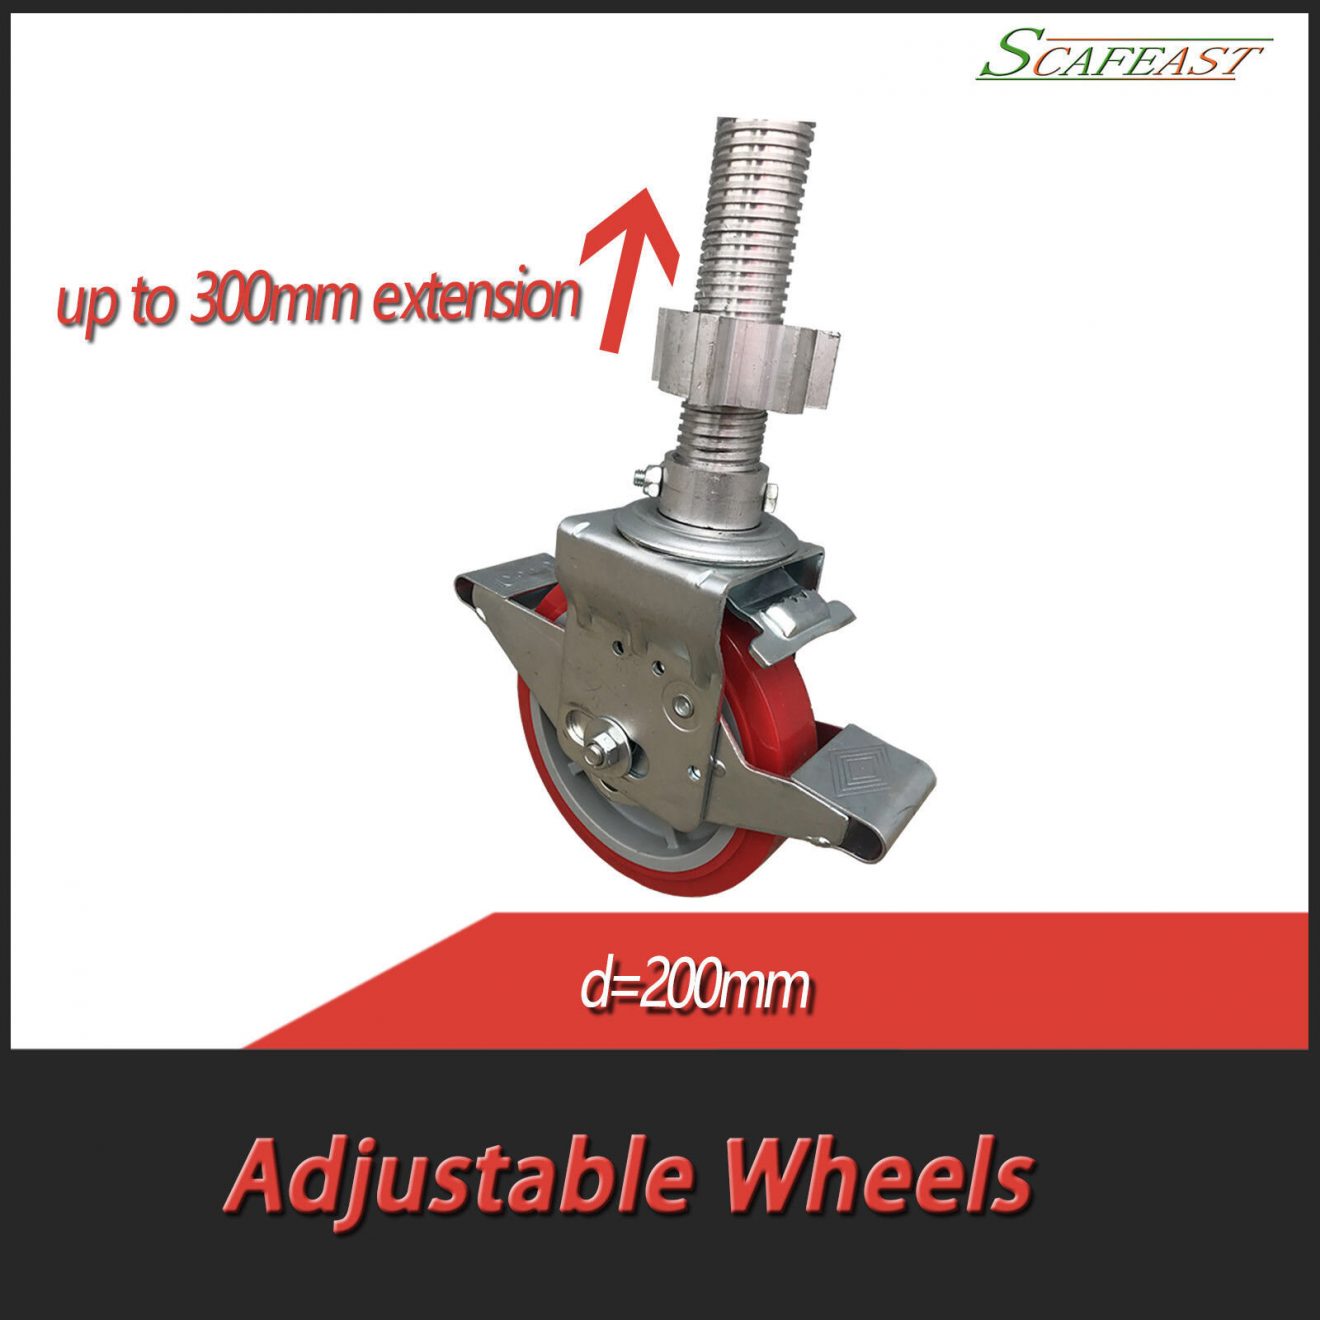 Adjustable Wheels mobile scaffold tower